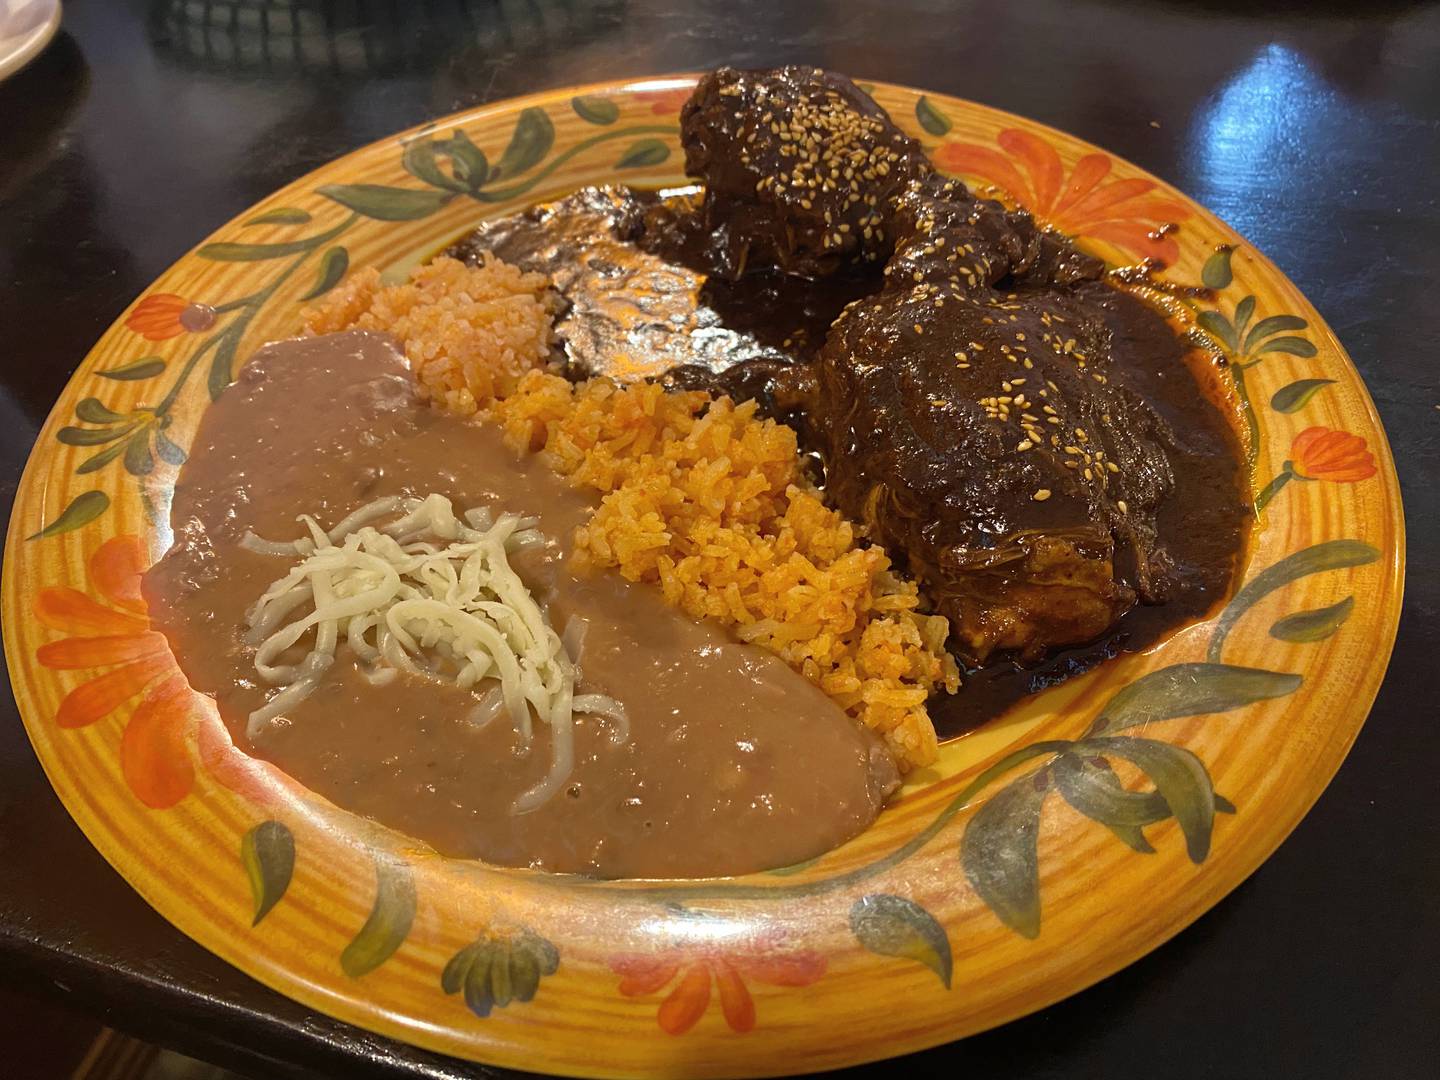 My fellow diner order the mole poblano ($15.99), which was a chicken breast with mole sauce, at Taqueria Las Cumbres in Crystal Lake.